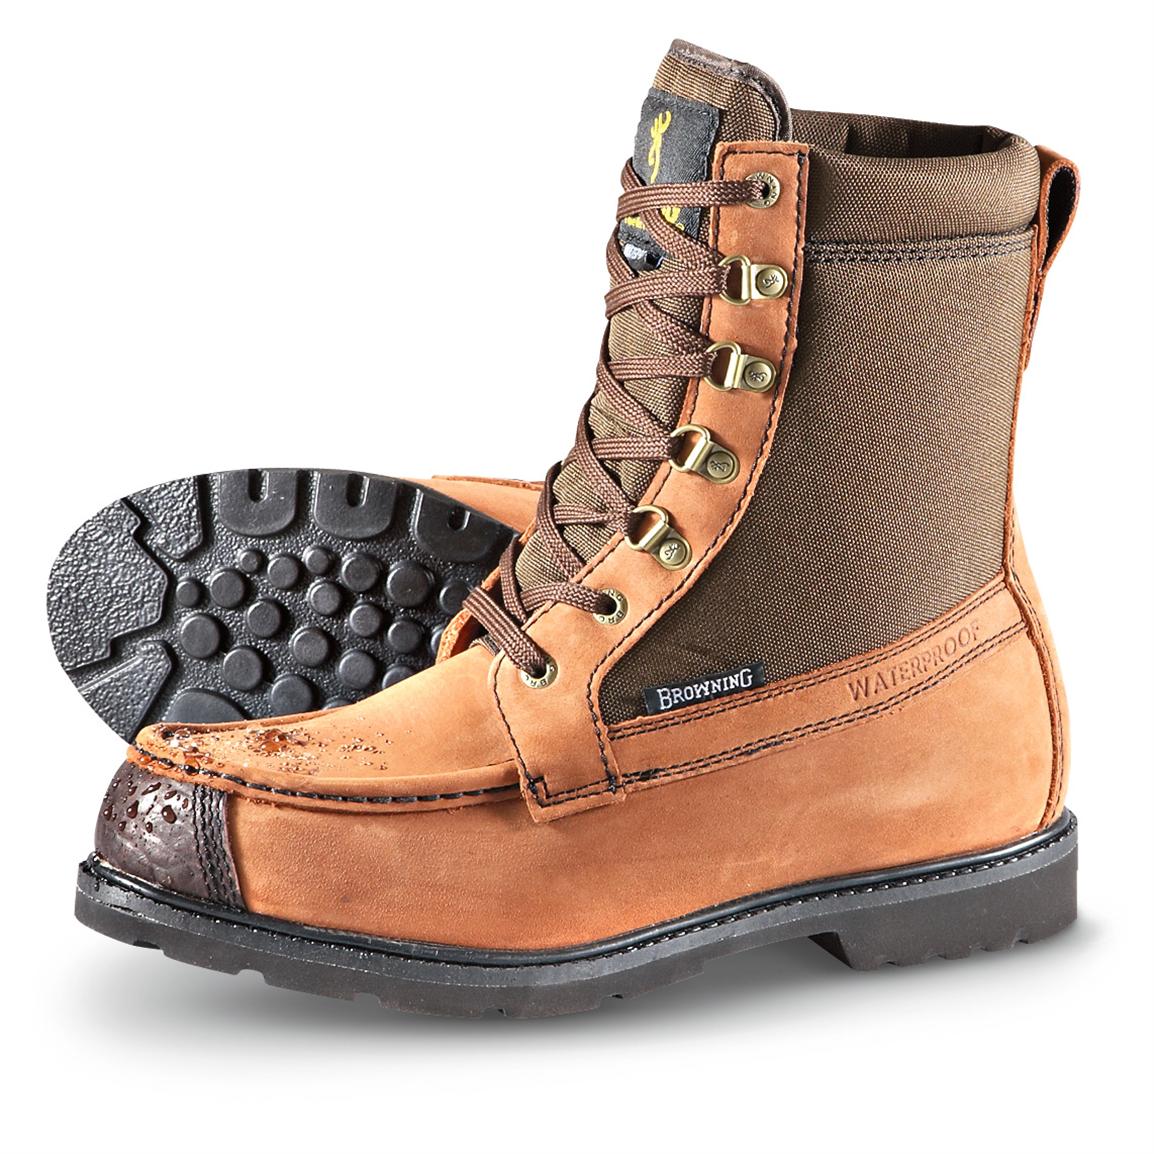 227830, Hunting Boots at Sportsman's Guide